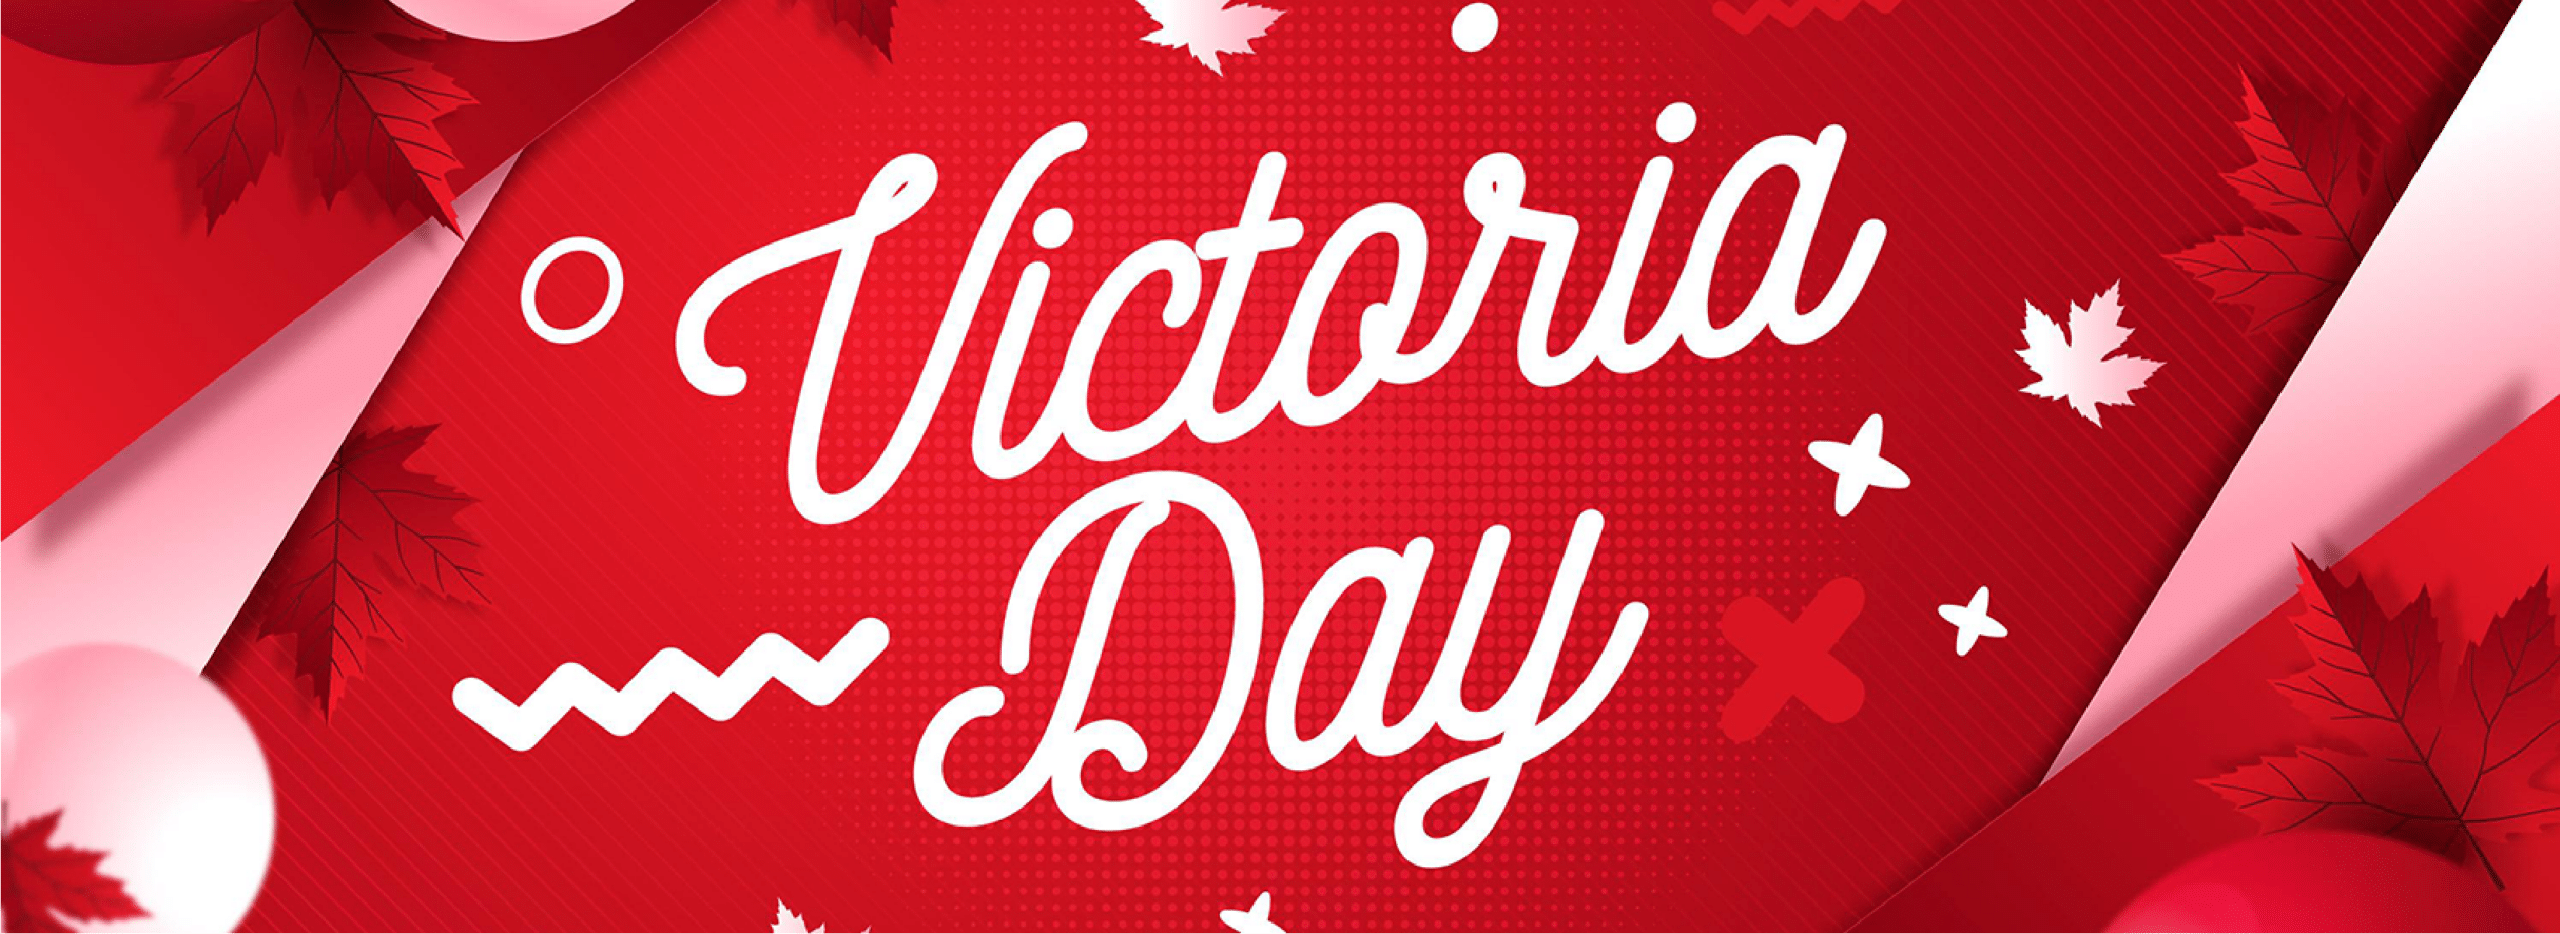 Graphic banner that says Victoria Day